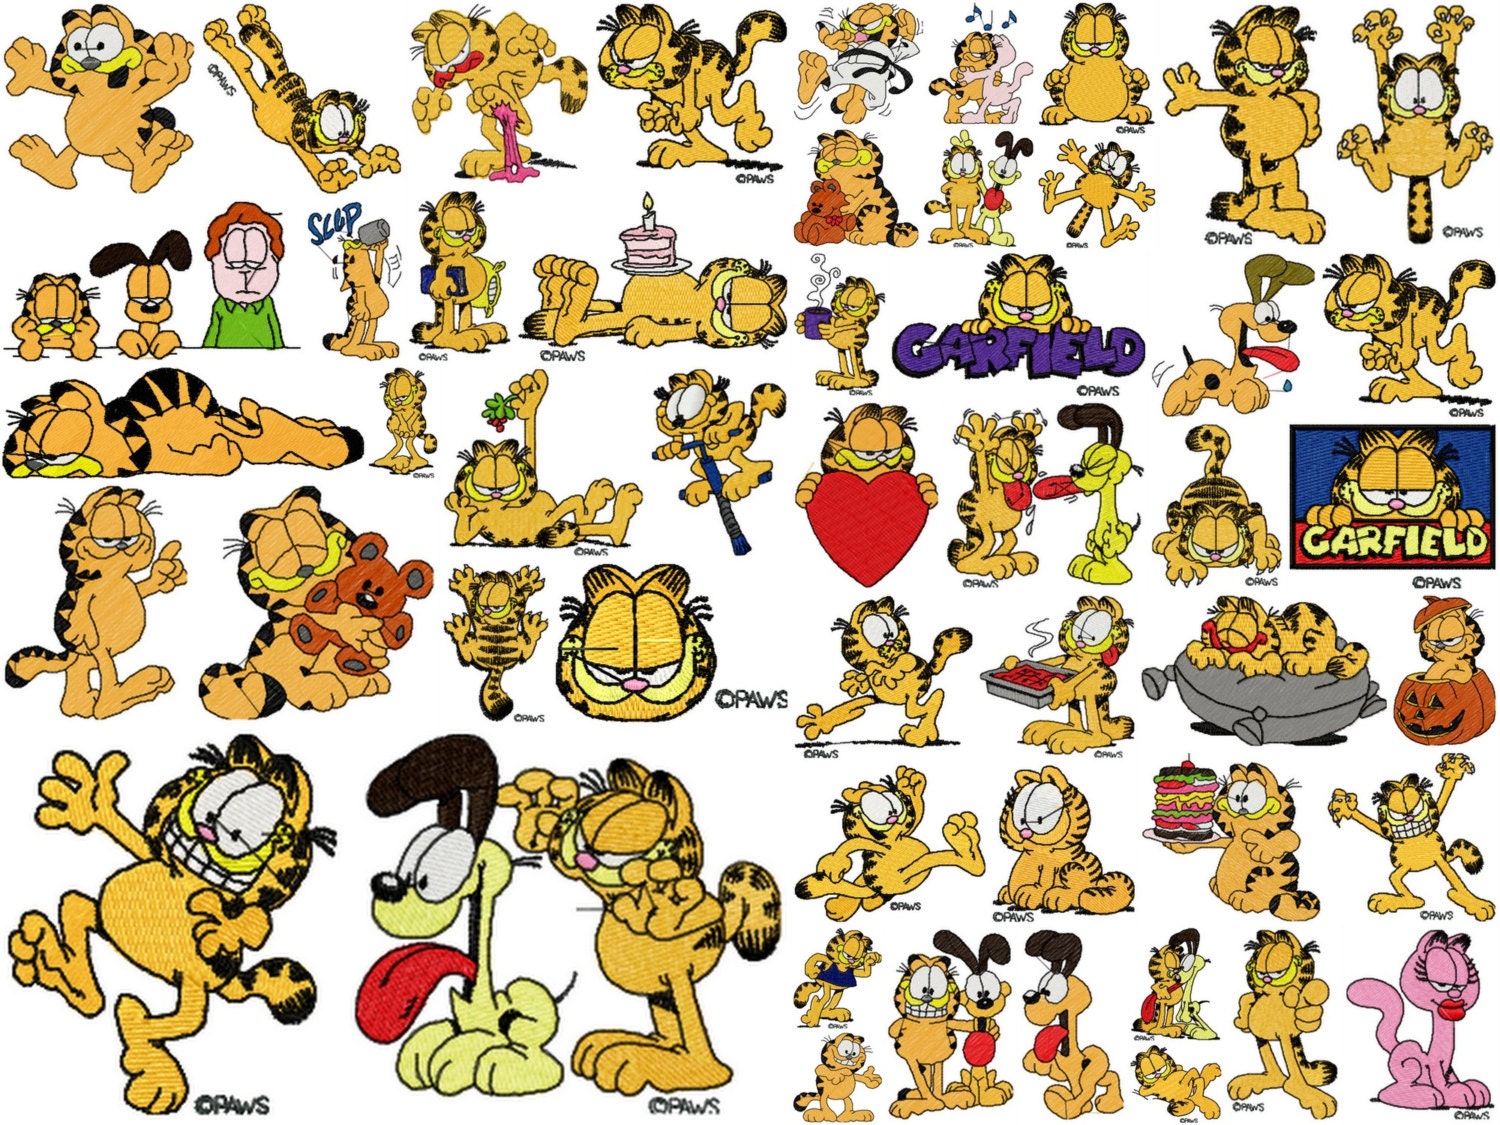 GARFIELD designs for embroidery machine instant download